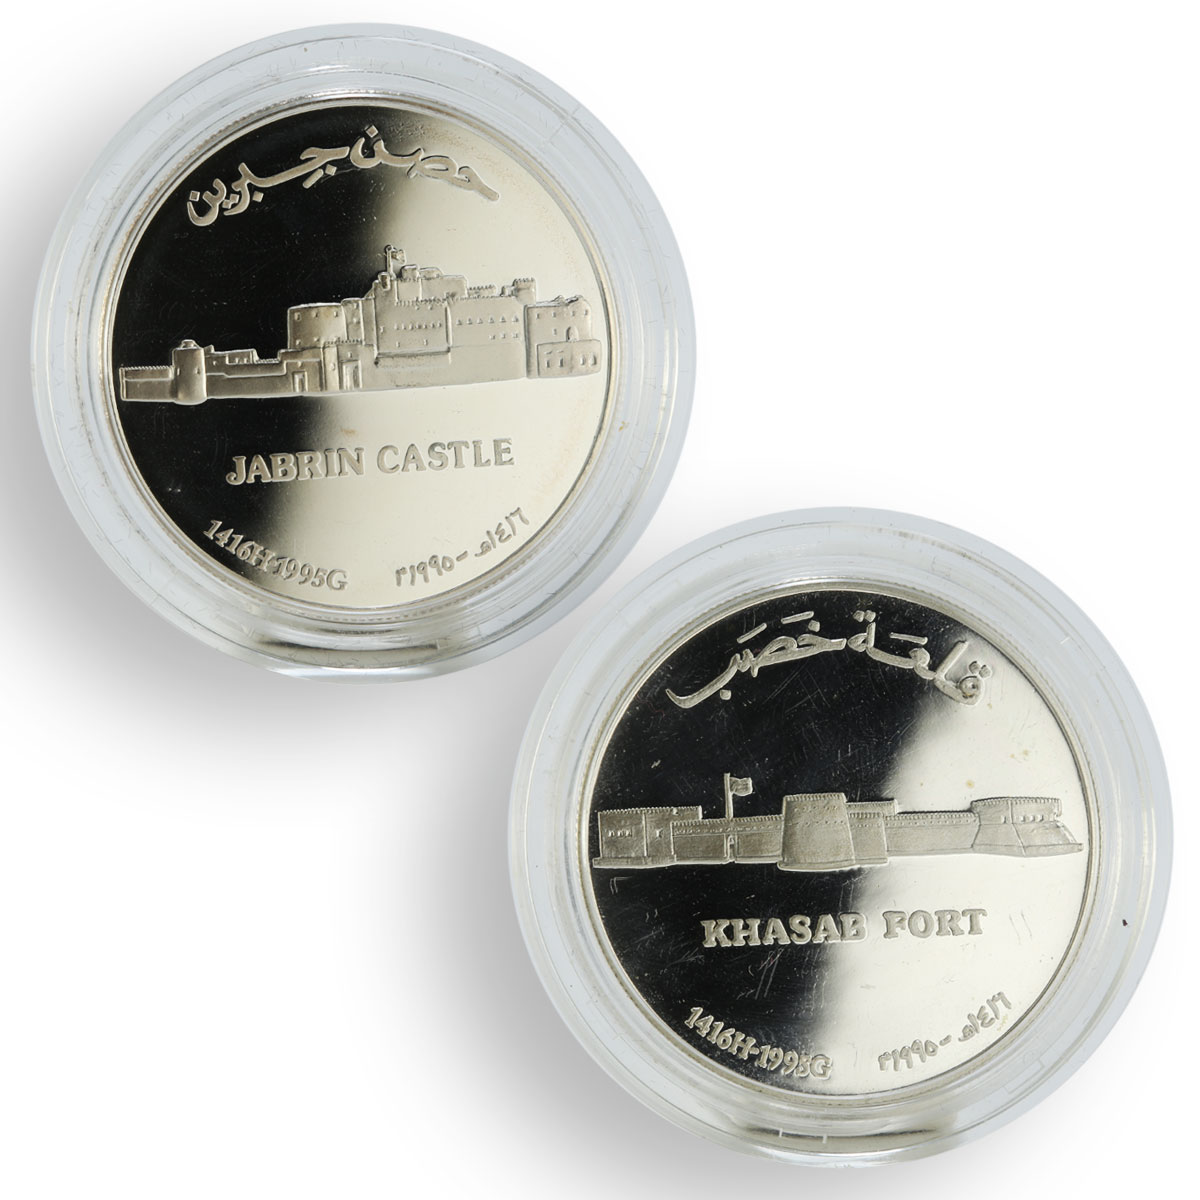 Oman set 2 coins Jabrin Castle and Khasab Fort proof silver coin 1995